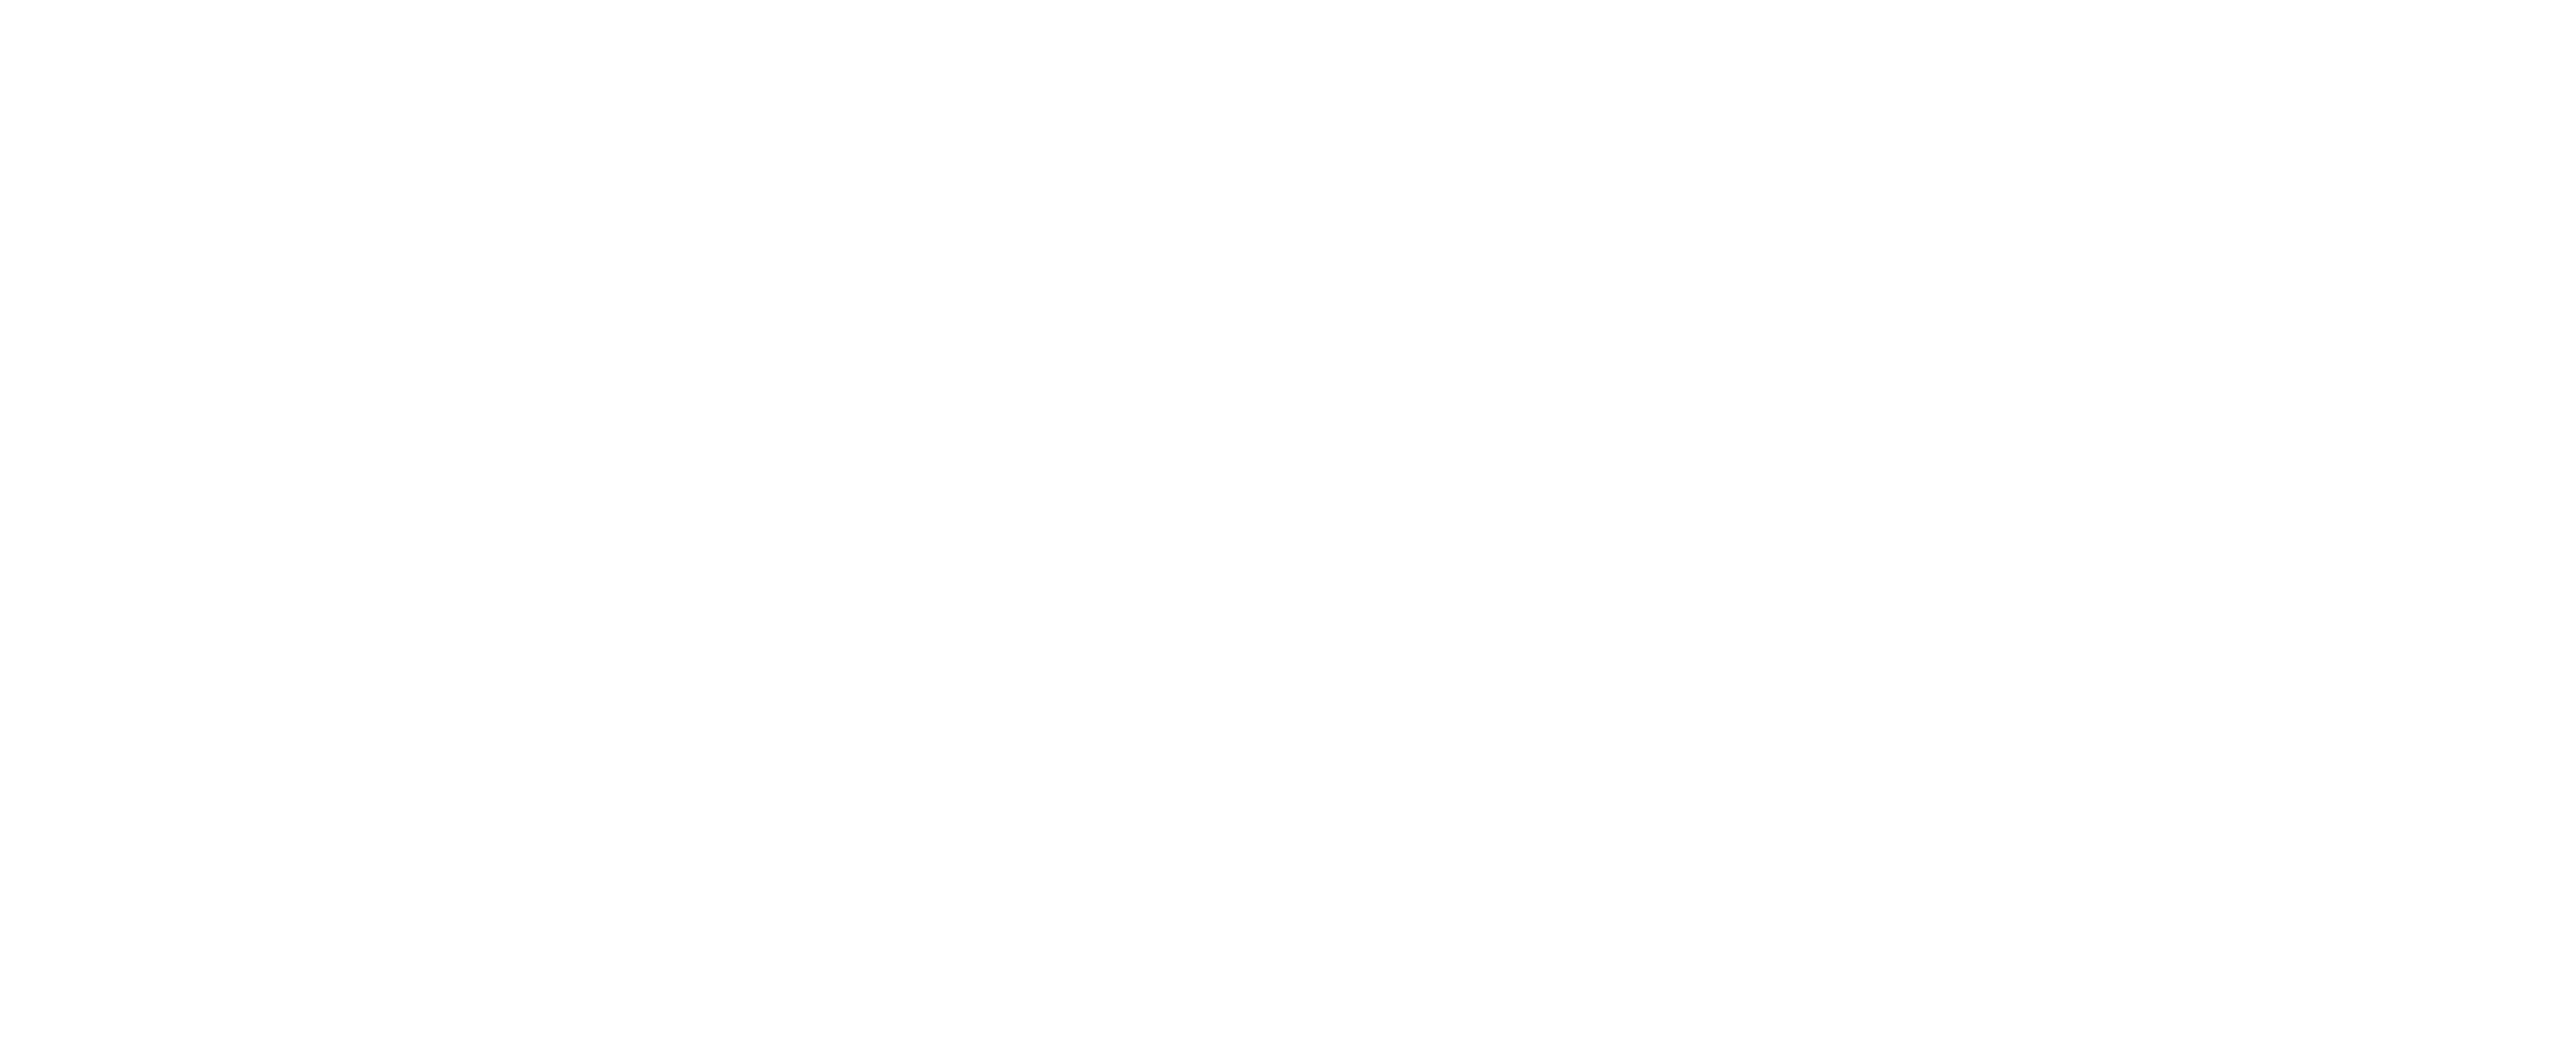 Your Dream Your Future in text